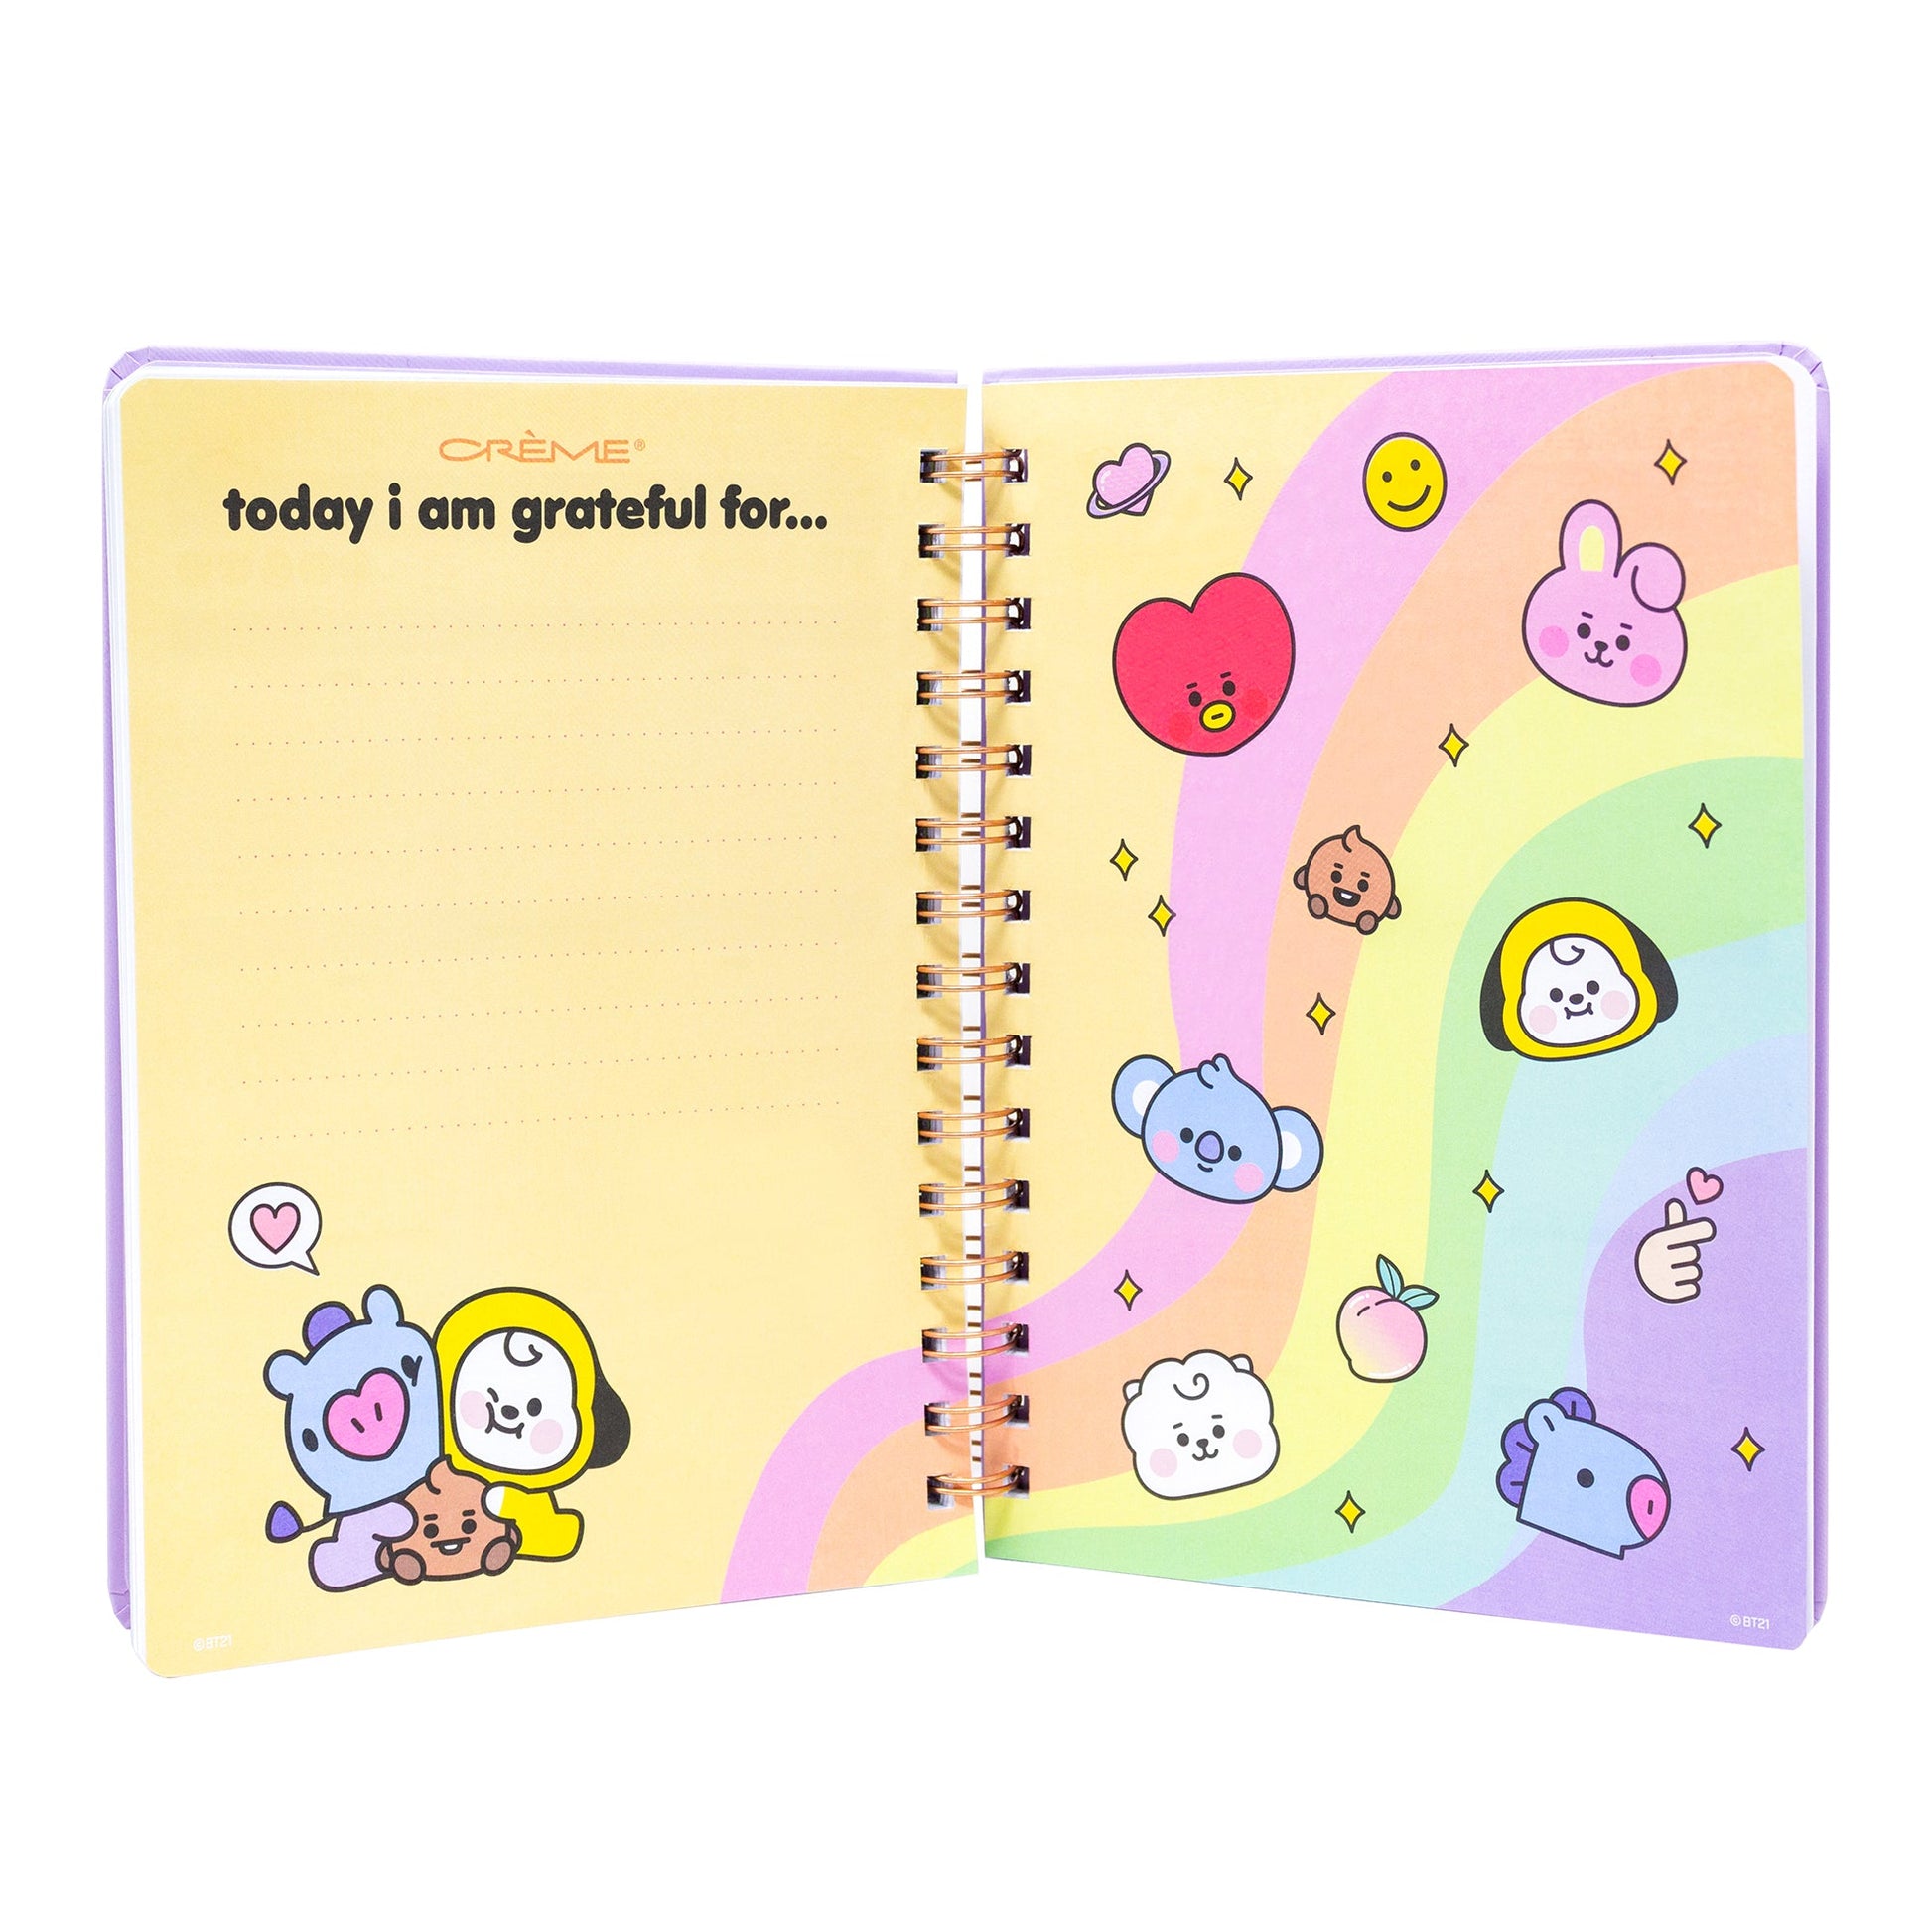 BT21 Baby Skincare Diary Diary The Crème Shop x BT21 BABY 